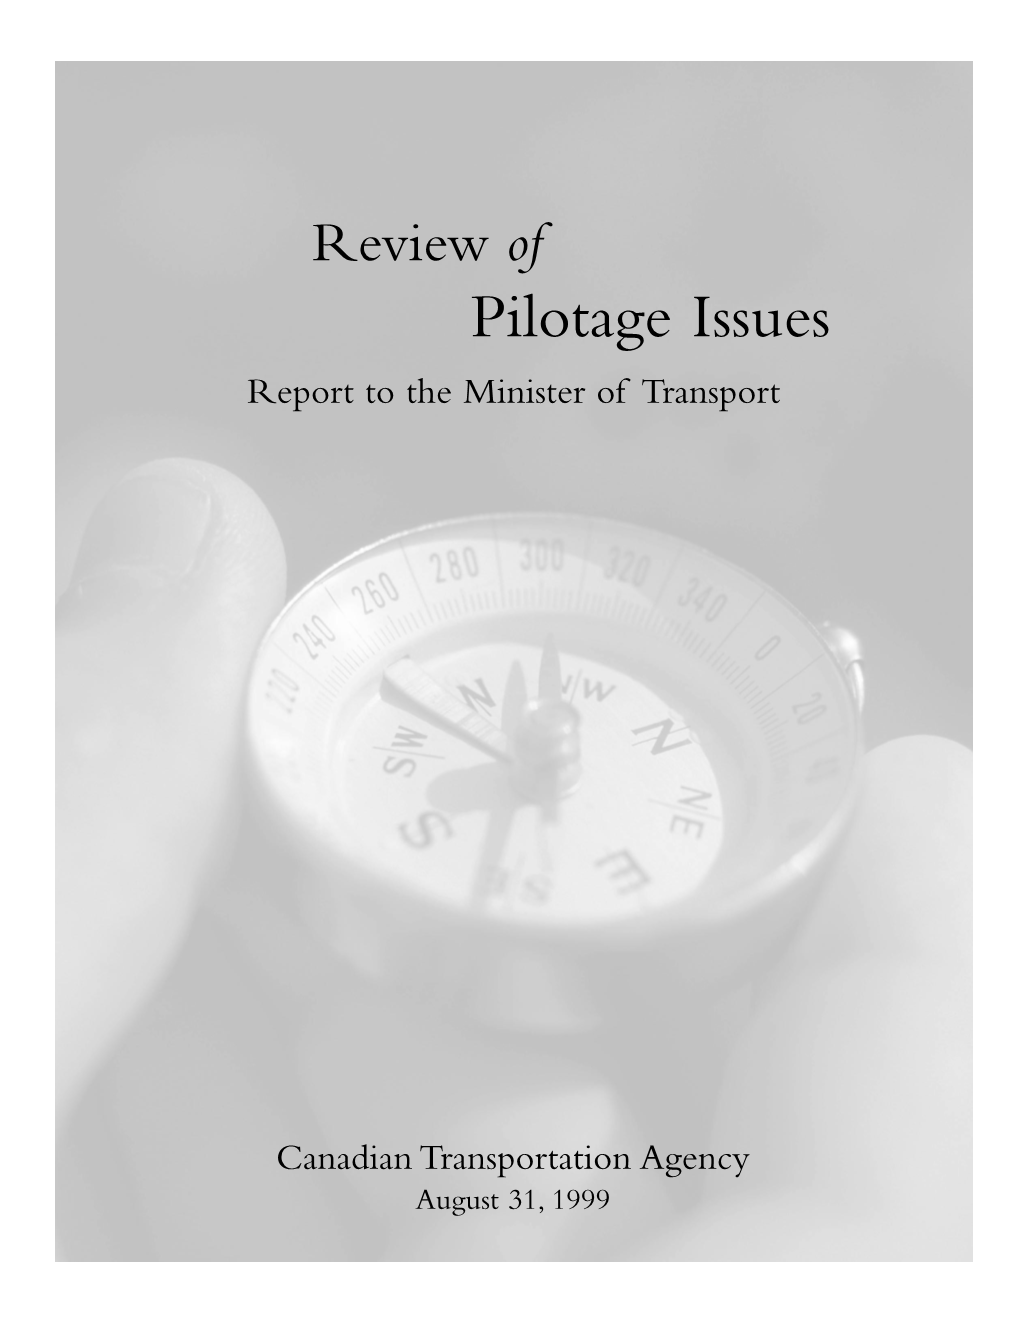 Pilotage Issues Report to the Minister of Transport